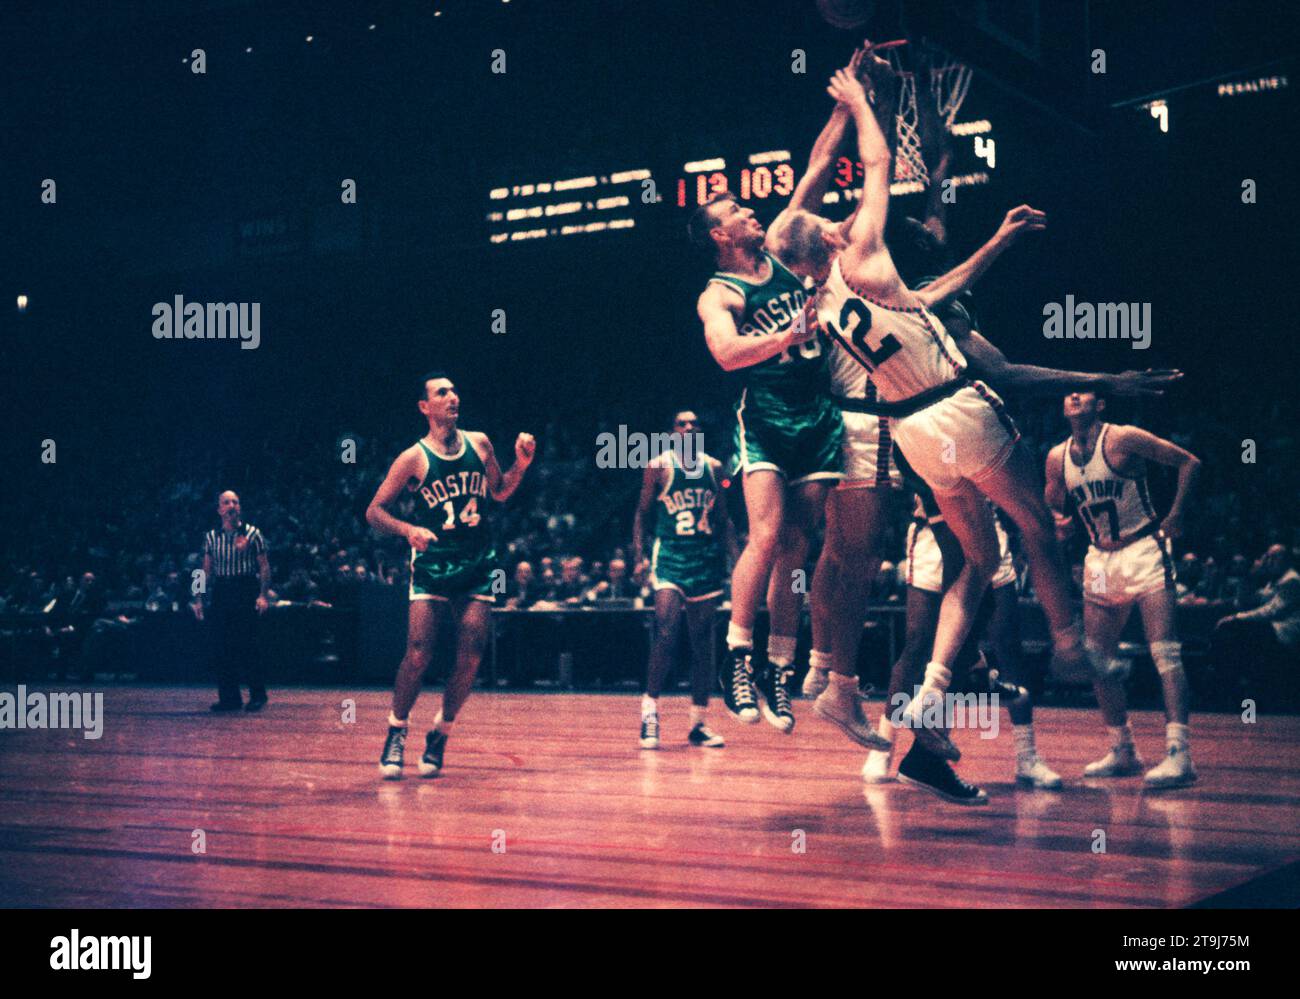 NEW YORK, NY - OCTOBER 25: Jim Loscutoff #18, Bill Russell #6 of the Boston Celtics and Kenny Sears #12 of the New York Knicks go go for the rebound during an NBA game on October 25, 1958 at the Madison Square Garden in New York, New York.  (Photo by Hy Peskin) *** Local Caption *** Jim Loscutoff;Kenny Sears;Bill Russell Stock Photo